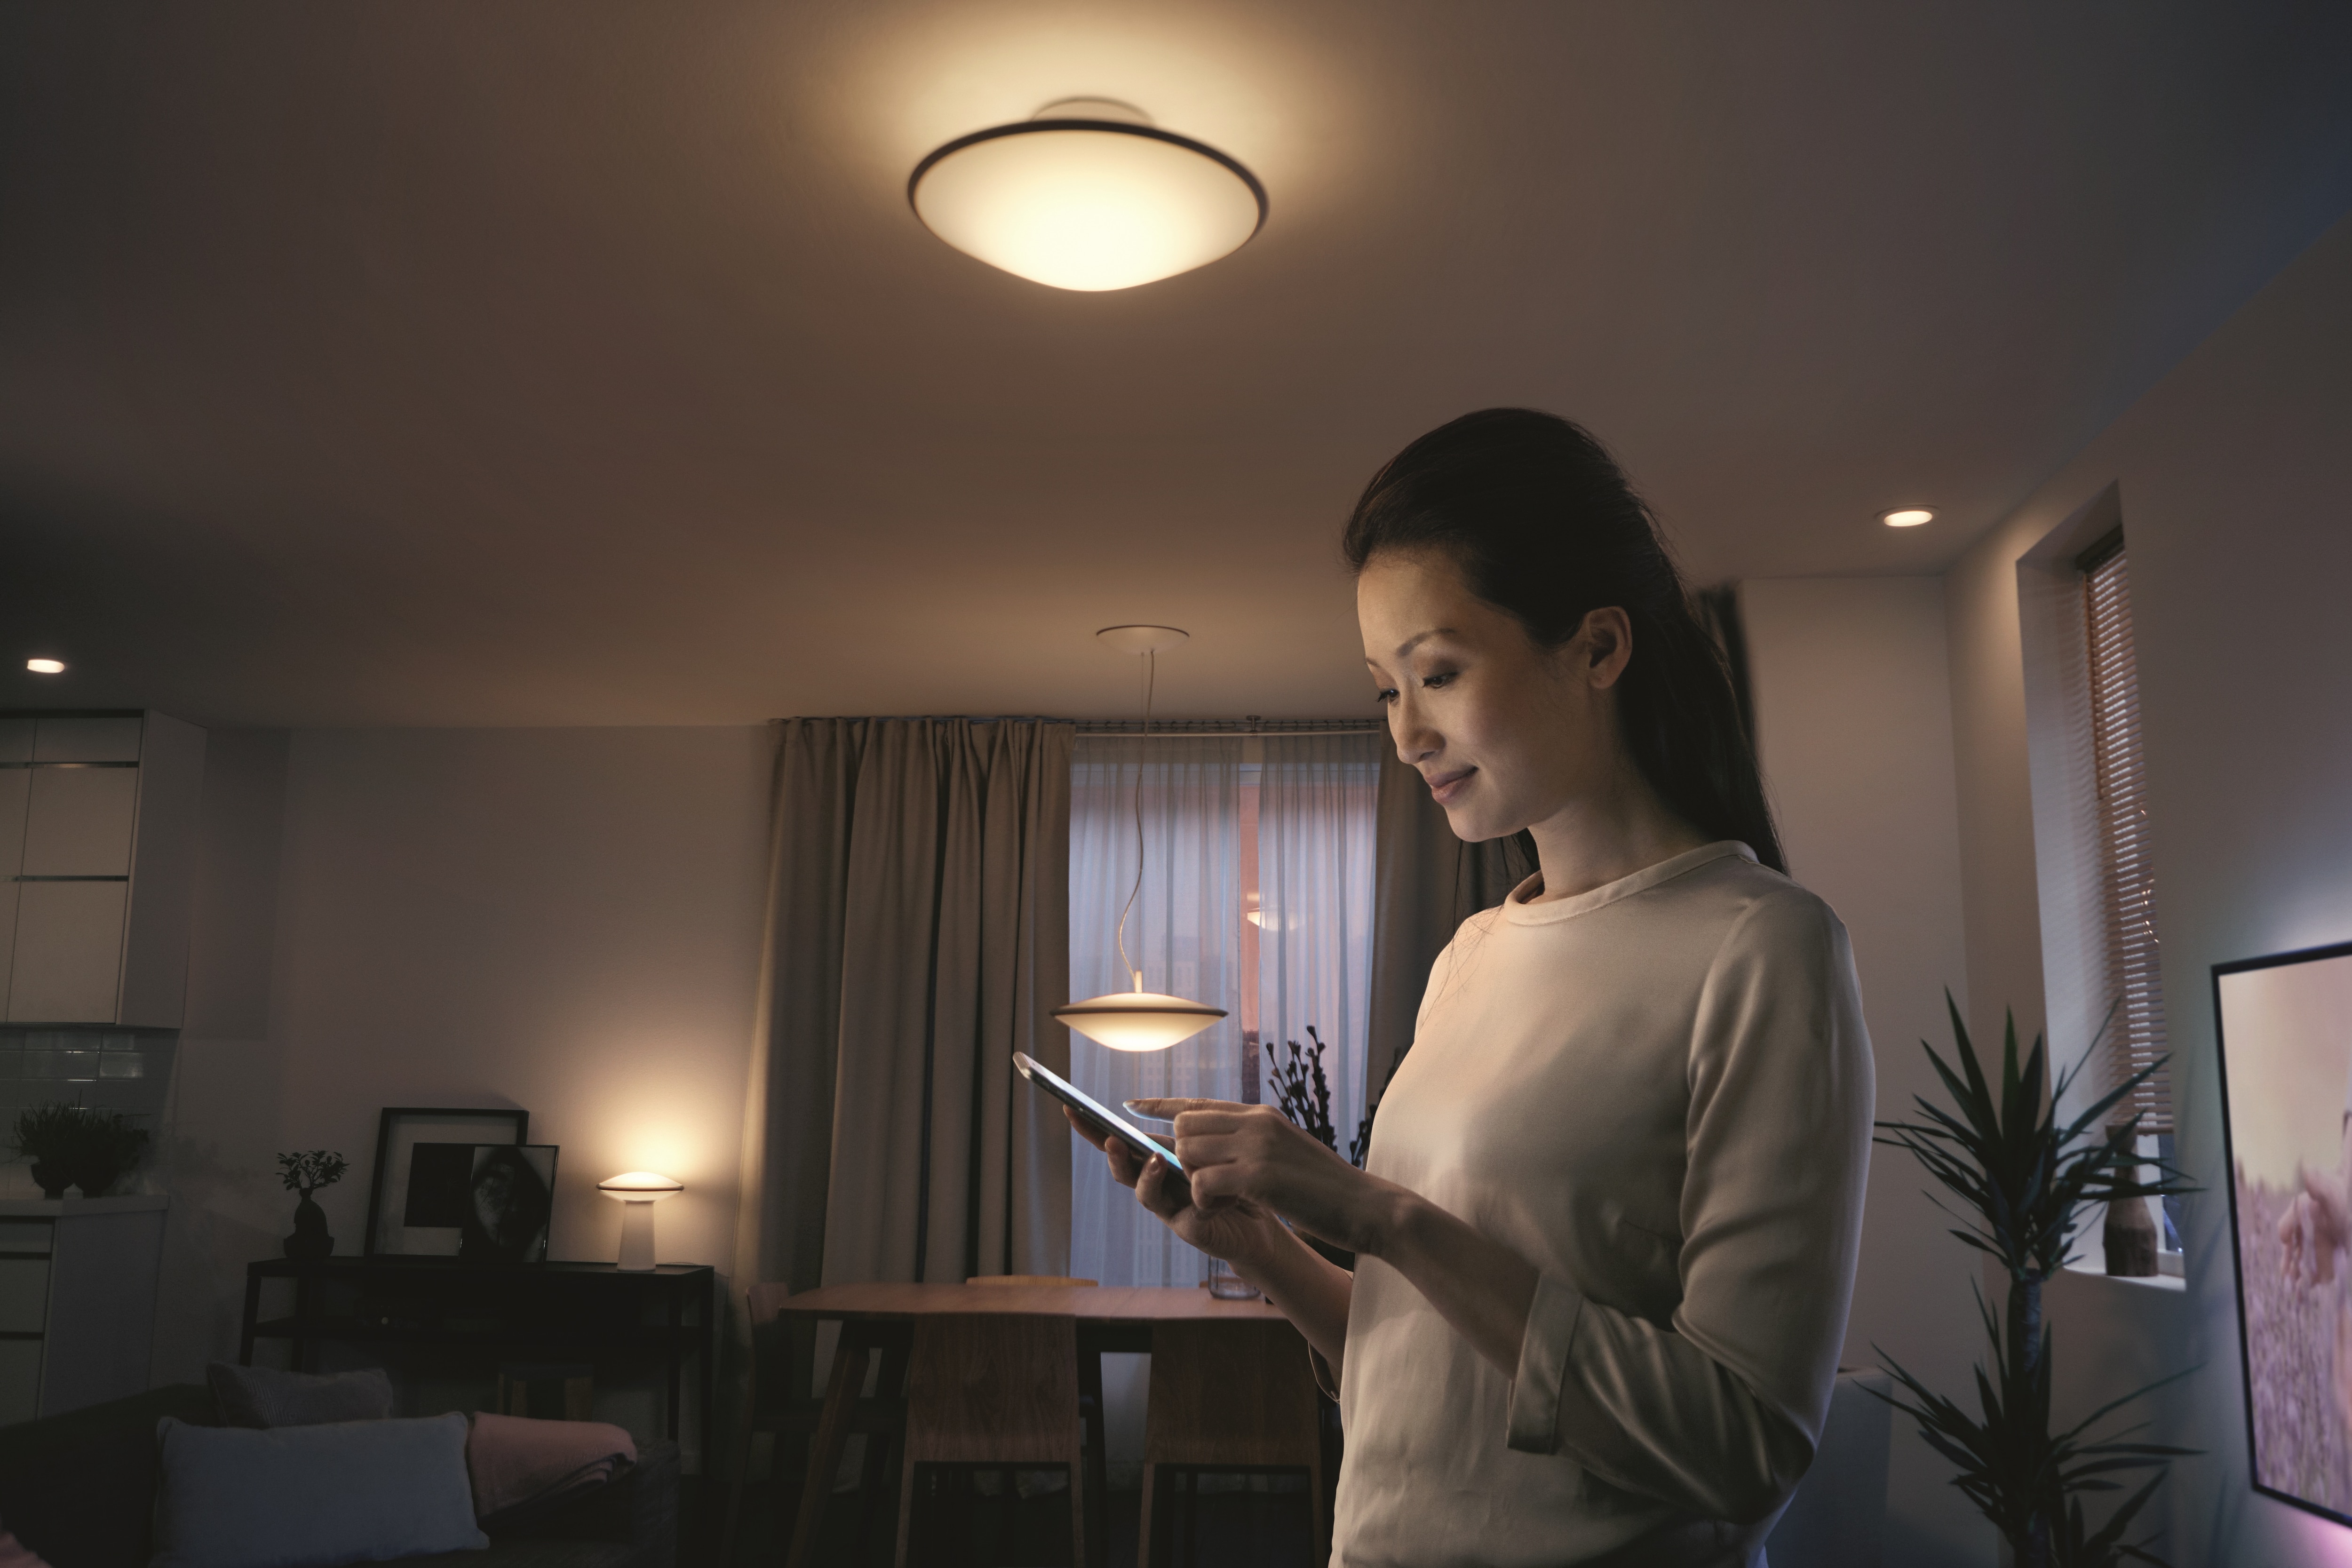 Simple, chic white: Philips Hue Phoenix delivers every shade of white light